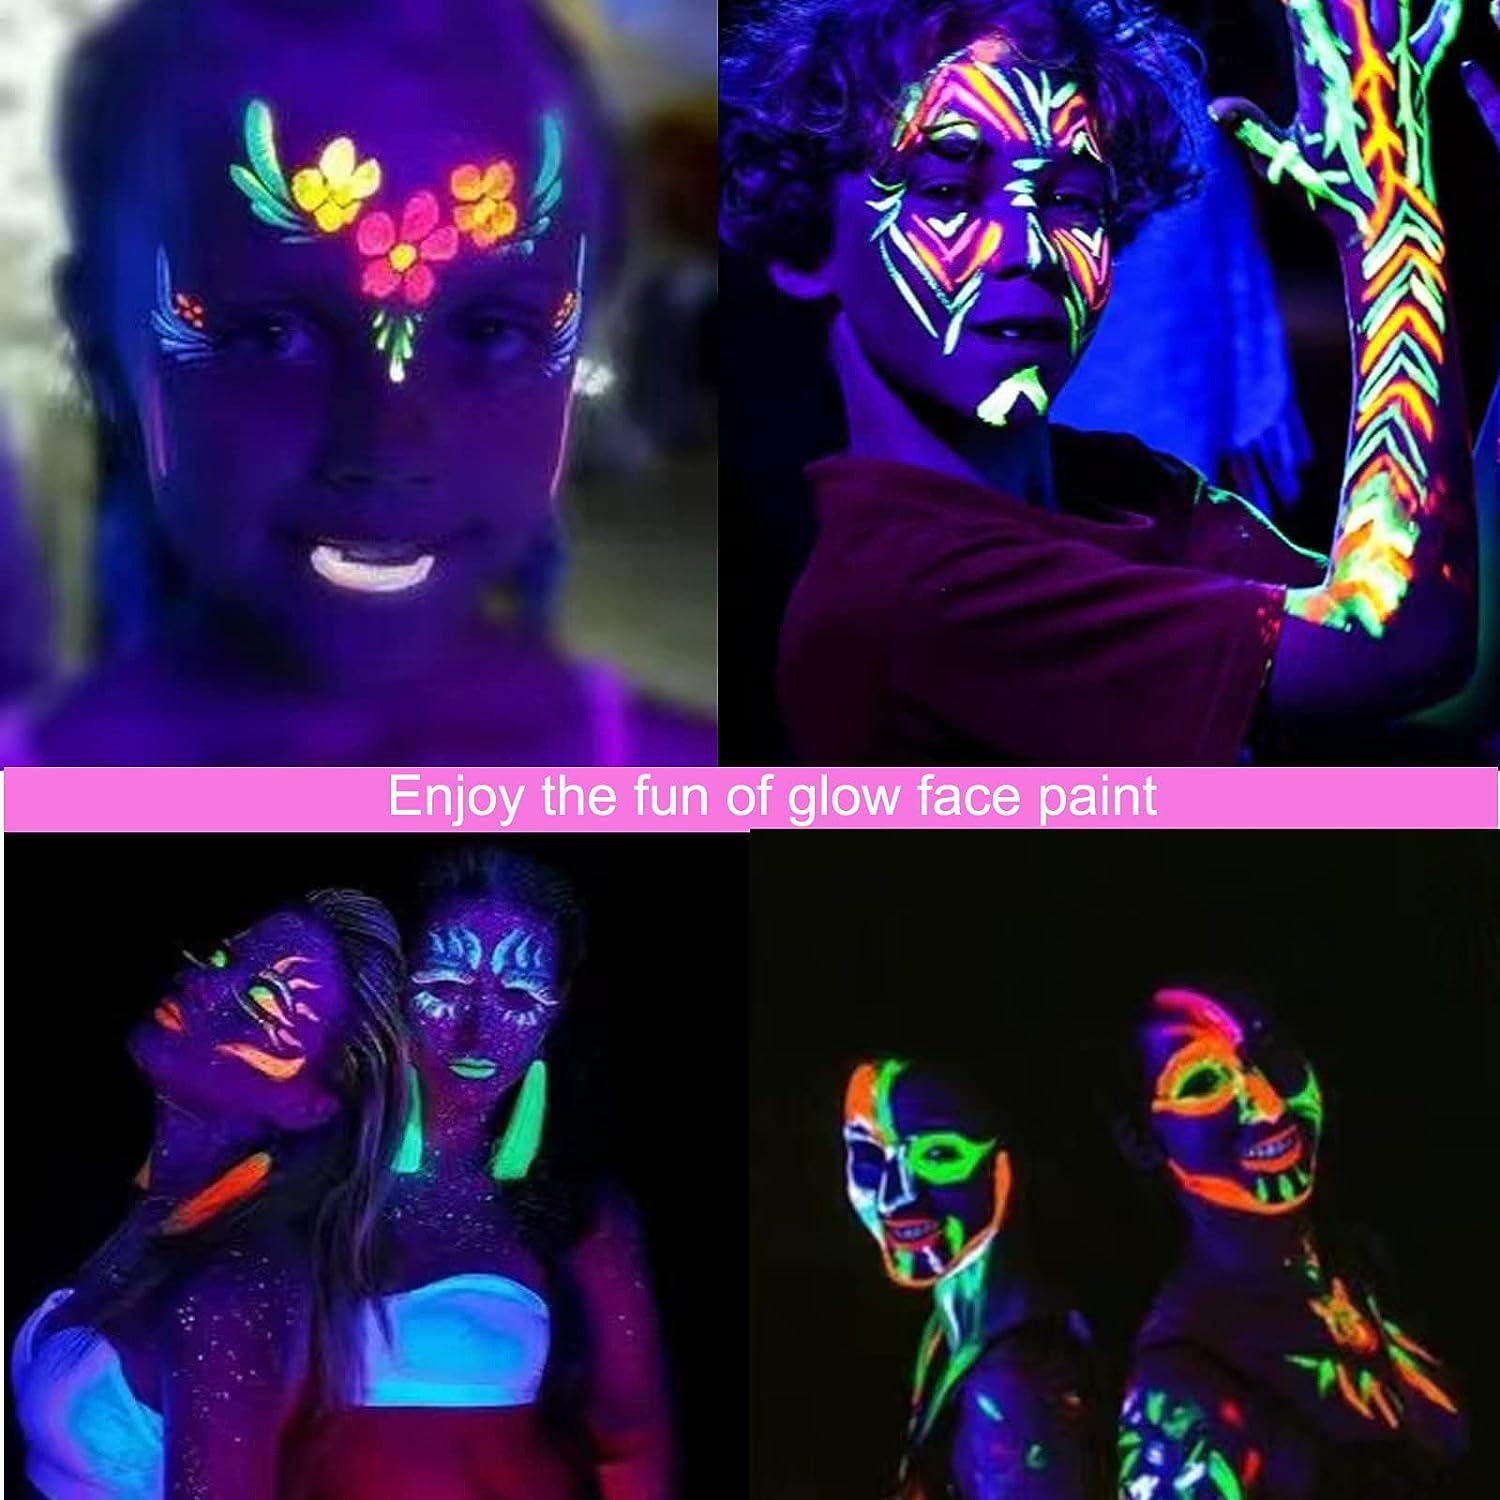 Face & Body Paint in Neon Color Fluorescent